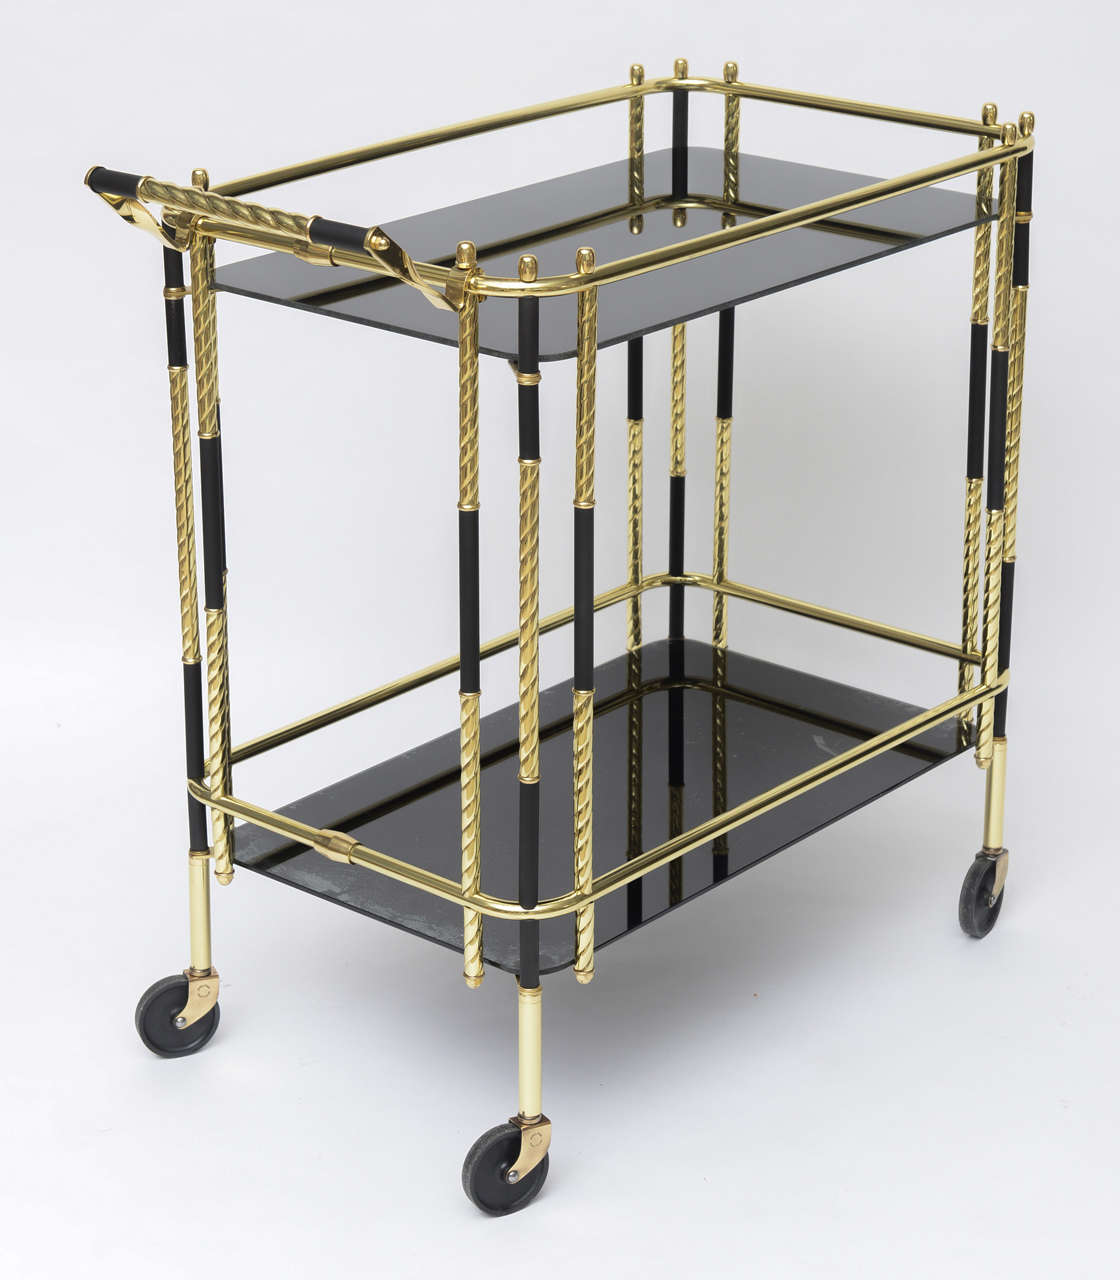 Polished brass bar cart with black accents and black glass shelves. Professionally polished.